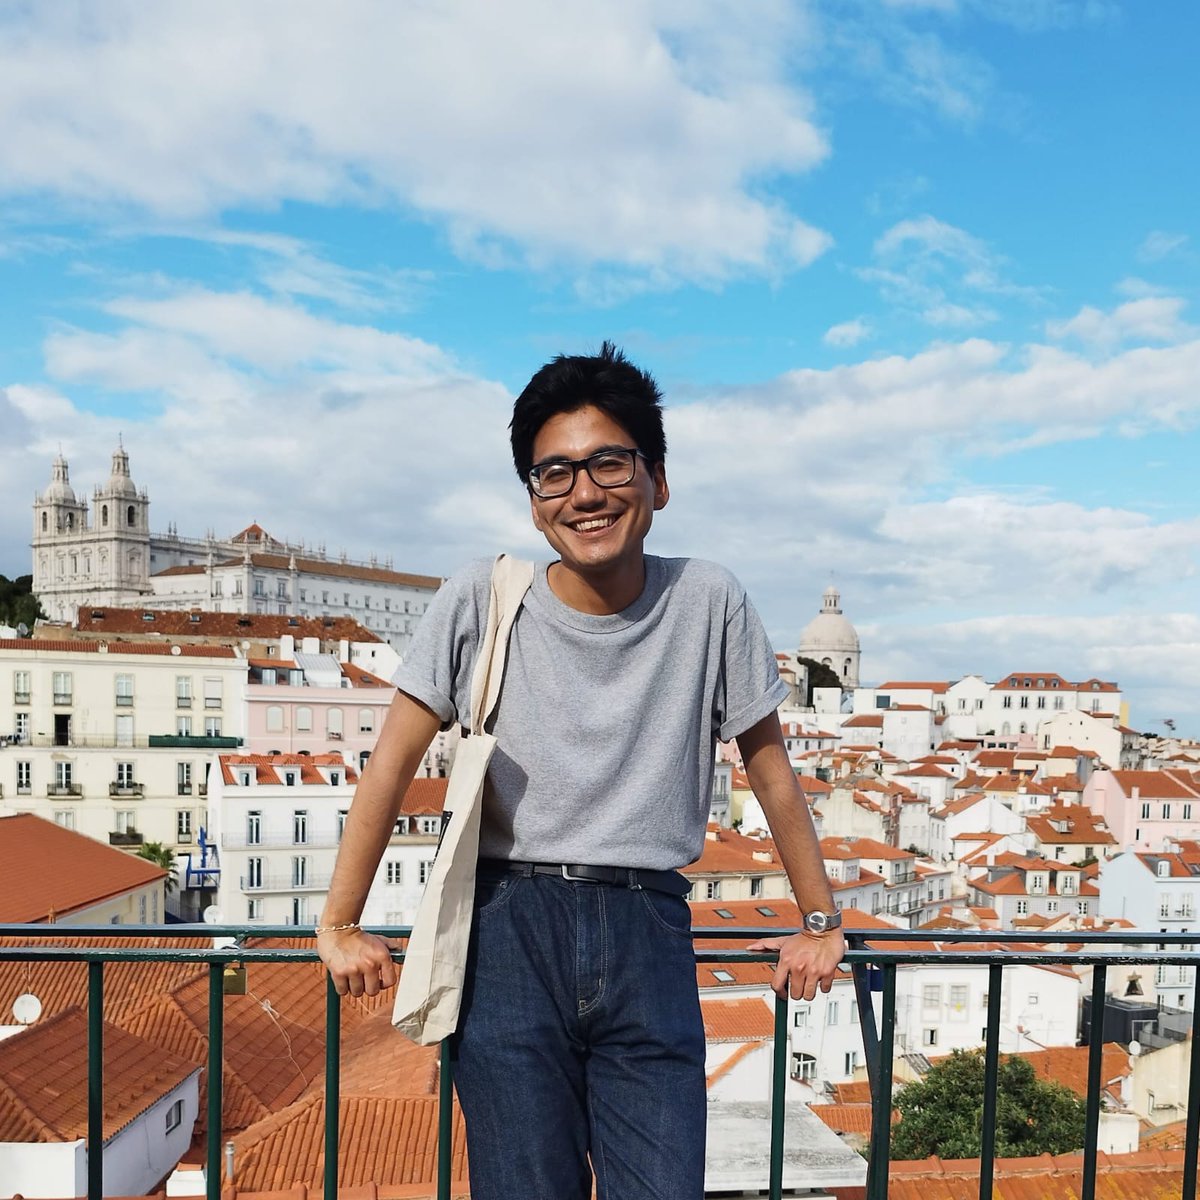 Yet another crucial member of PILAS this year is Rafael Shimabukuro (@rafashimabukuro), our treasurer! Rafael is a PhD candidate at Cambridge. When he's not seeking to understand the birth of Fujimorismo as a sociopolitical movement, he enjoys exploring the depths of Wikipedia.